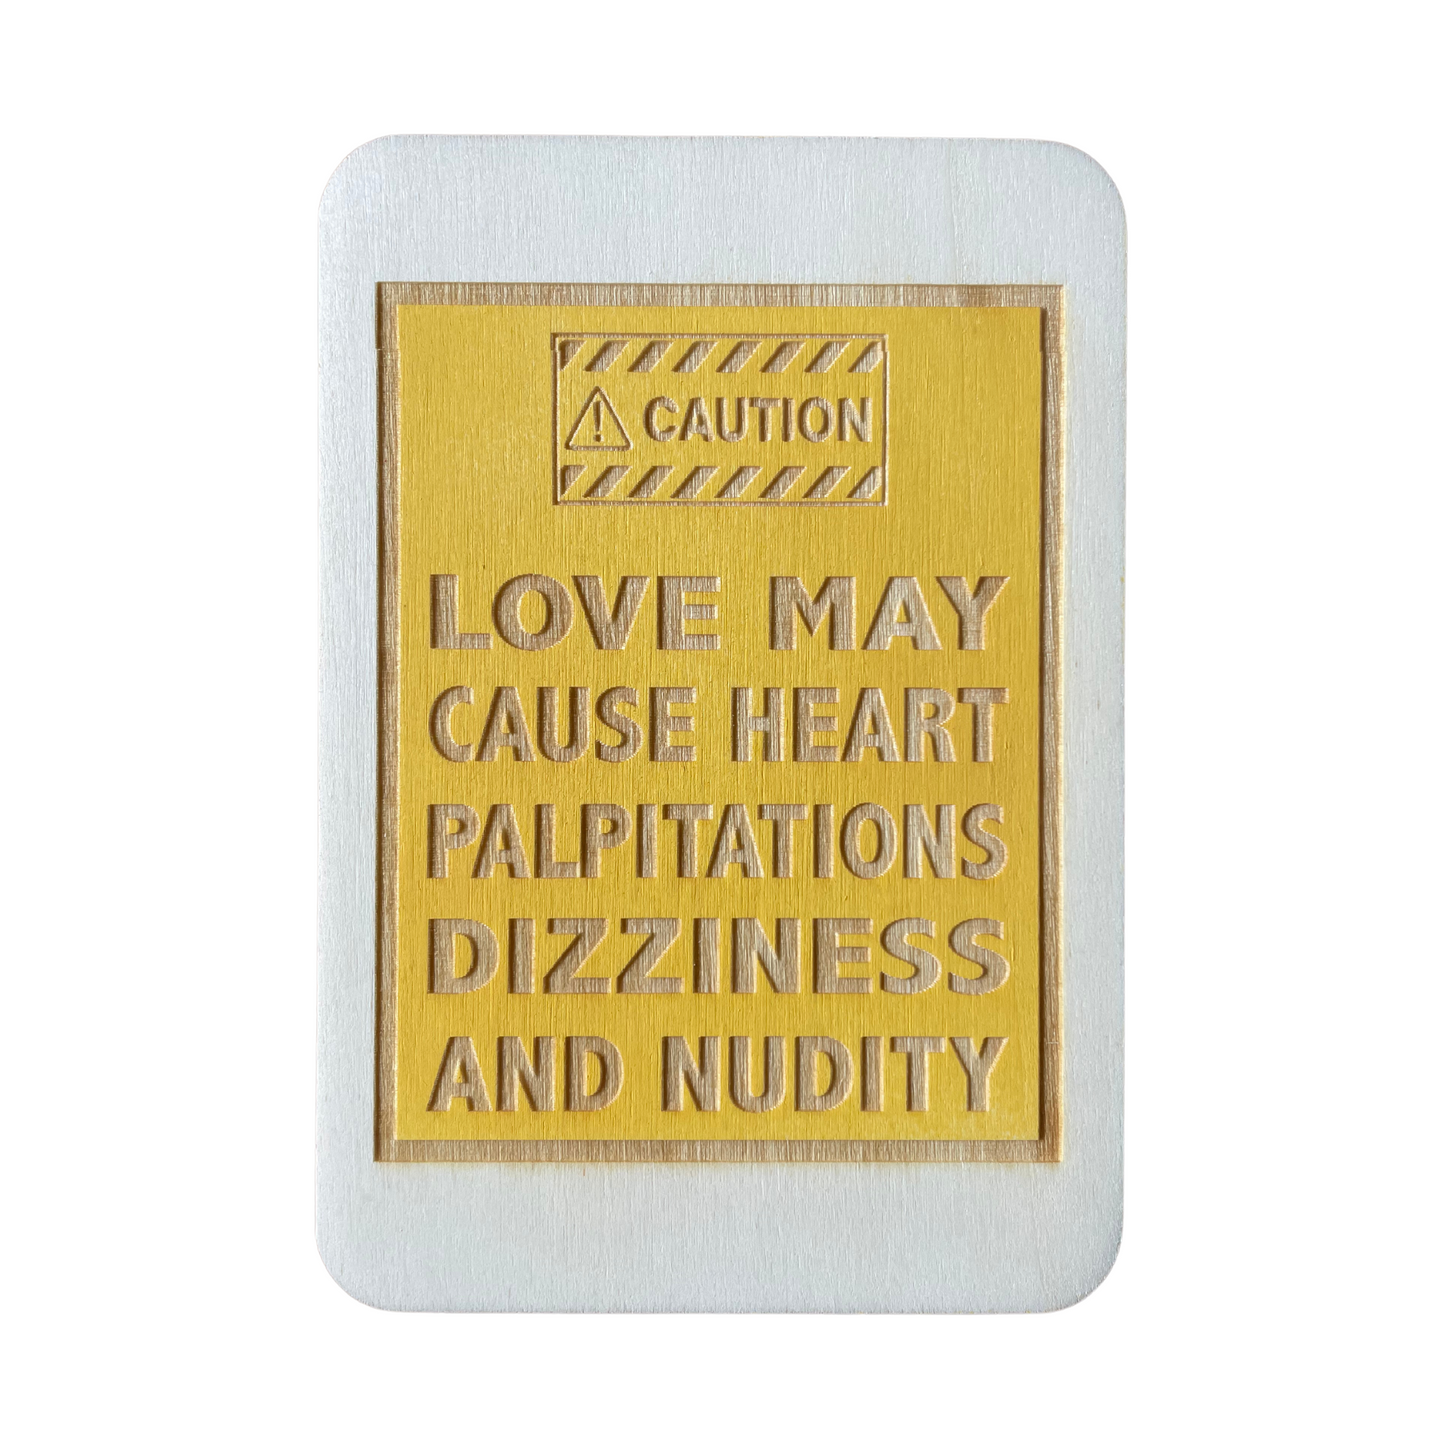 Caution. Love may cause heart palpitations, dizziness and nudity.